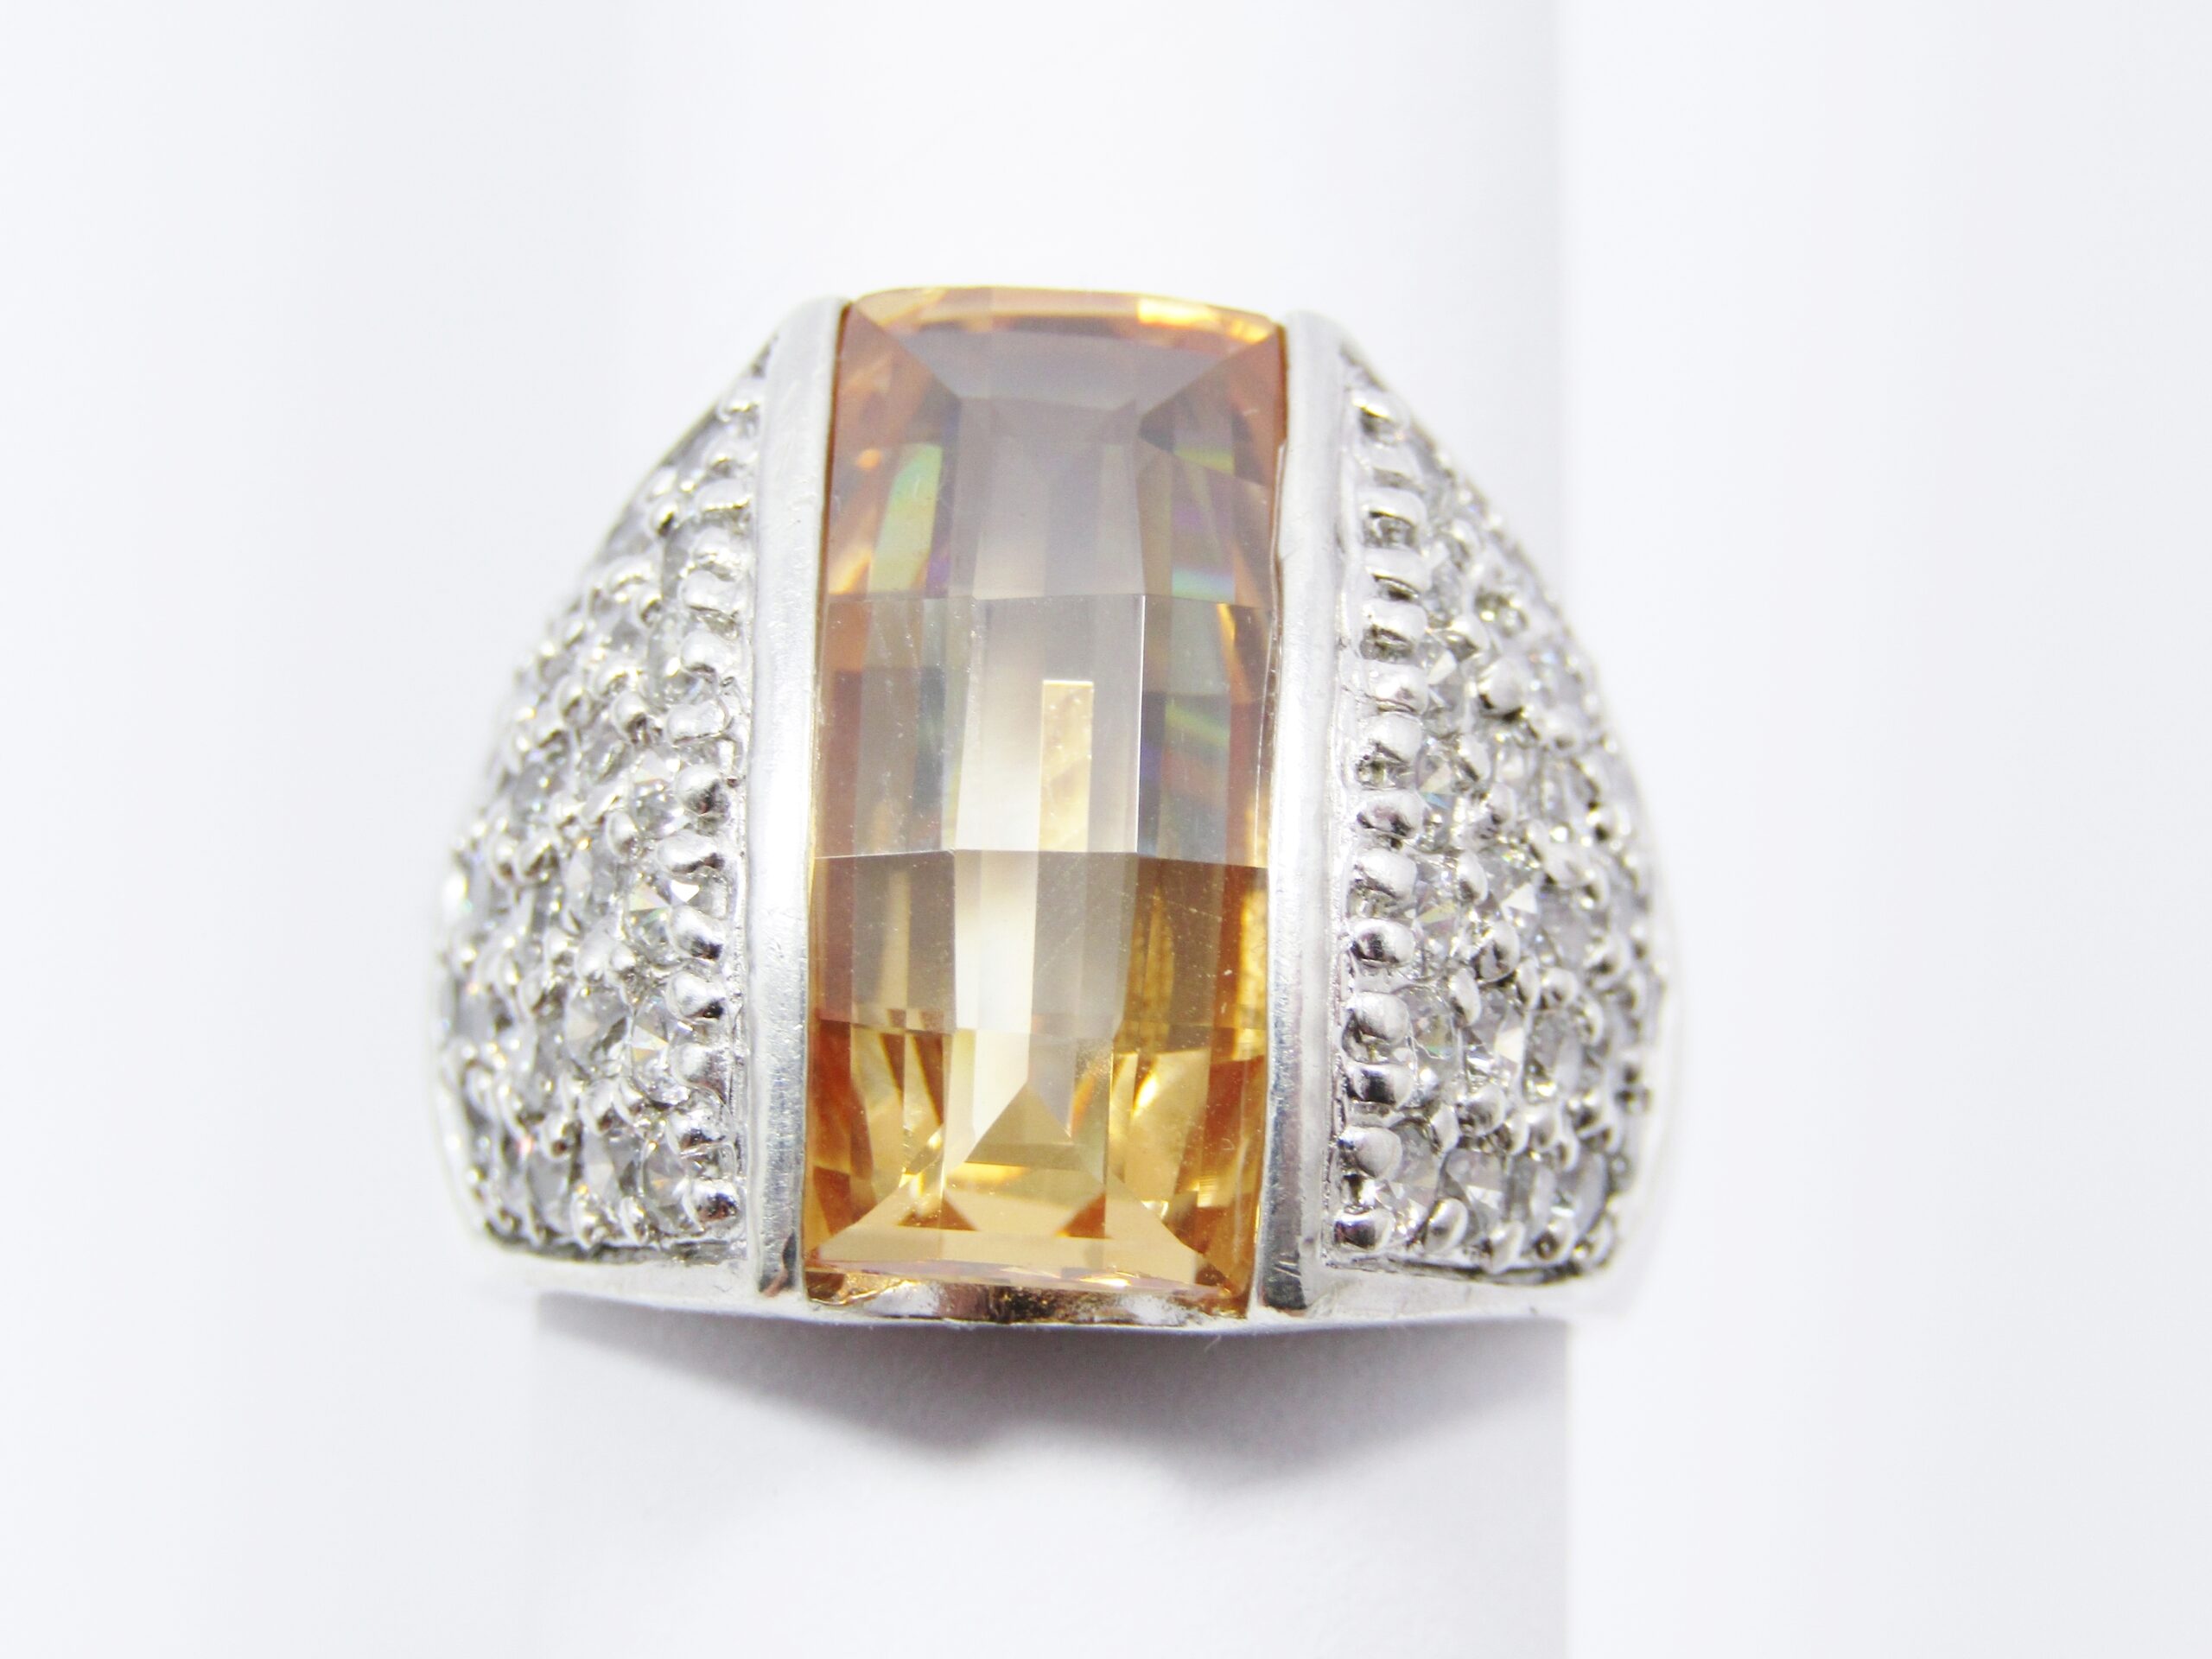 A Gorgeous Chunky Faceted Copper Color Zirconia Stone Ring in Sterling Silver.